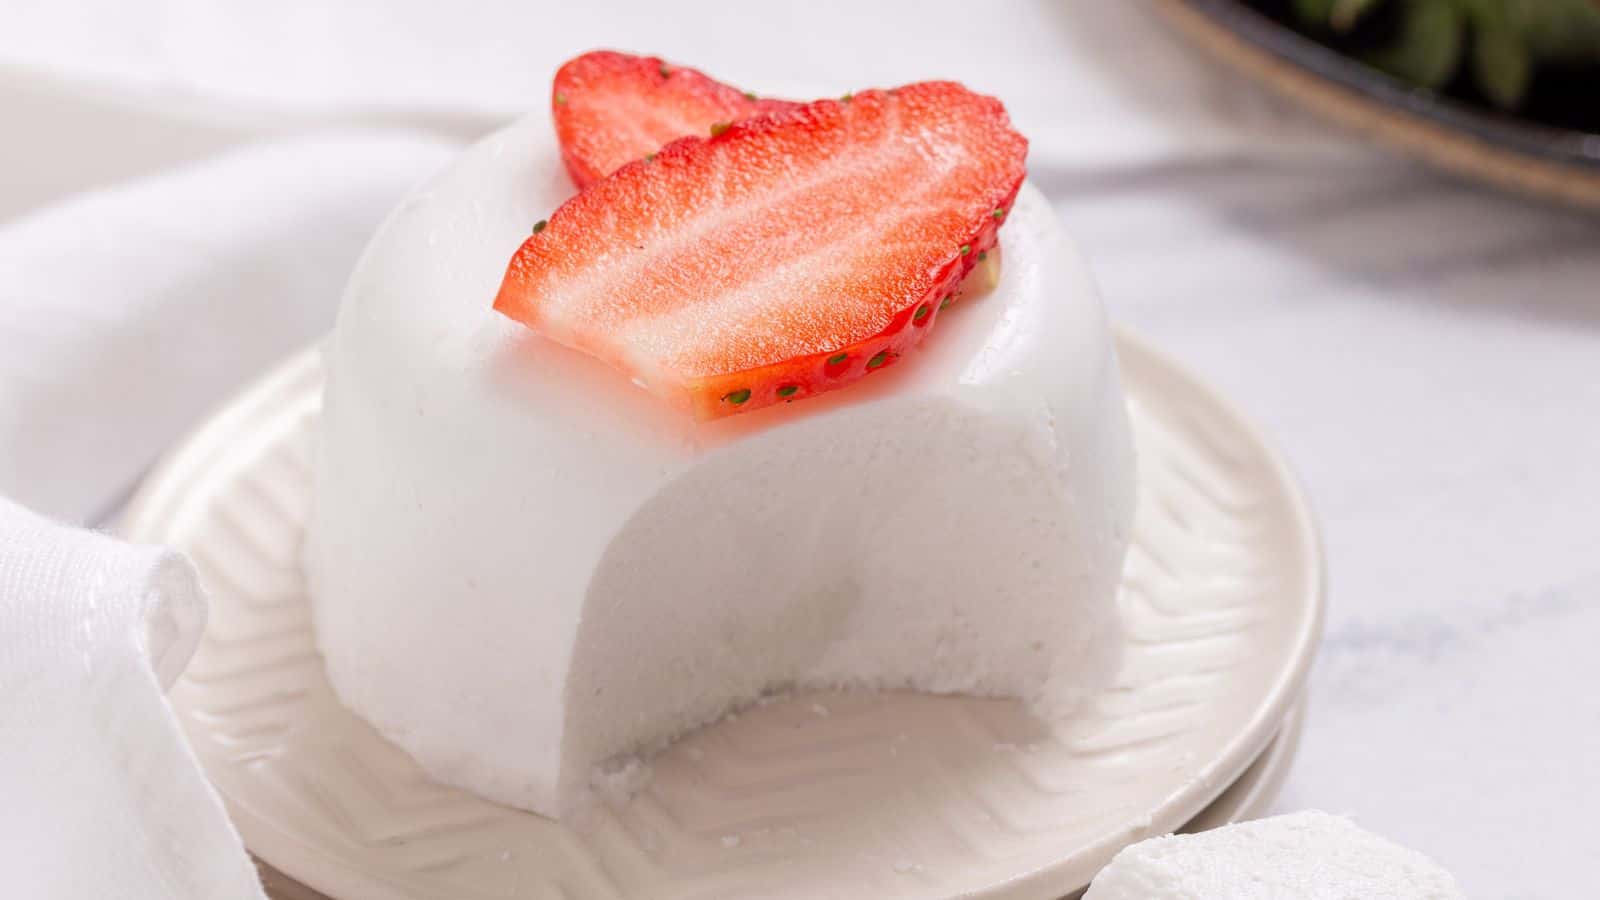 A slice of white, creamy panna cotta topped with a fresh strawberry slice on a white plate, with a textured napkin beside it.